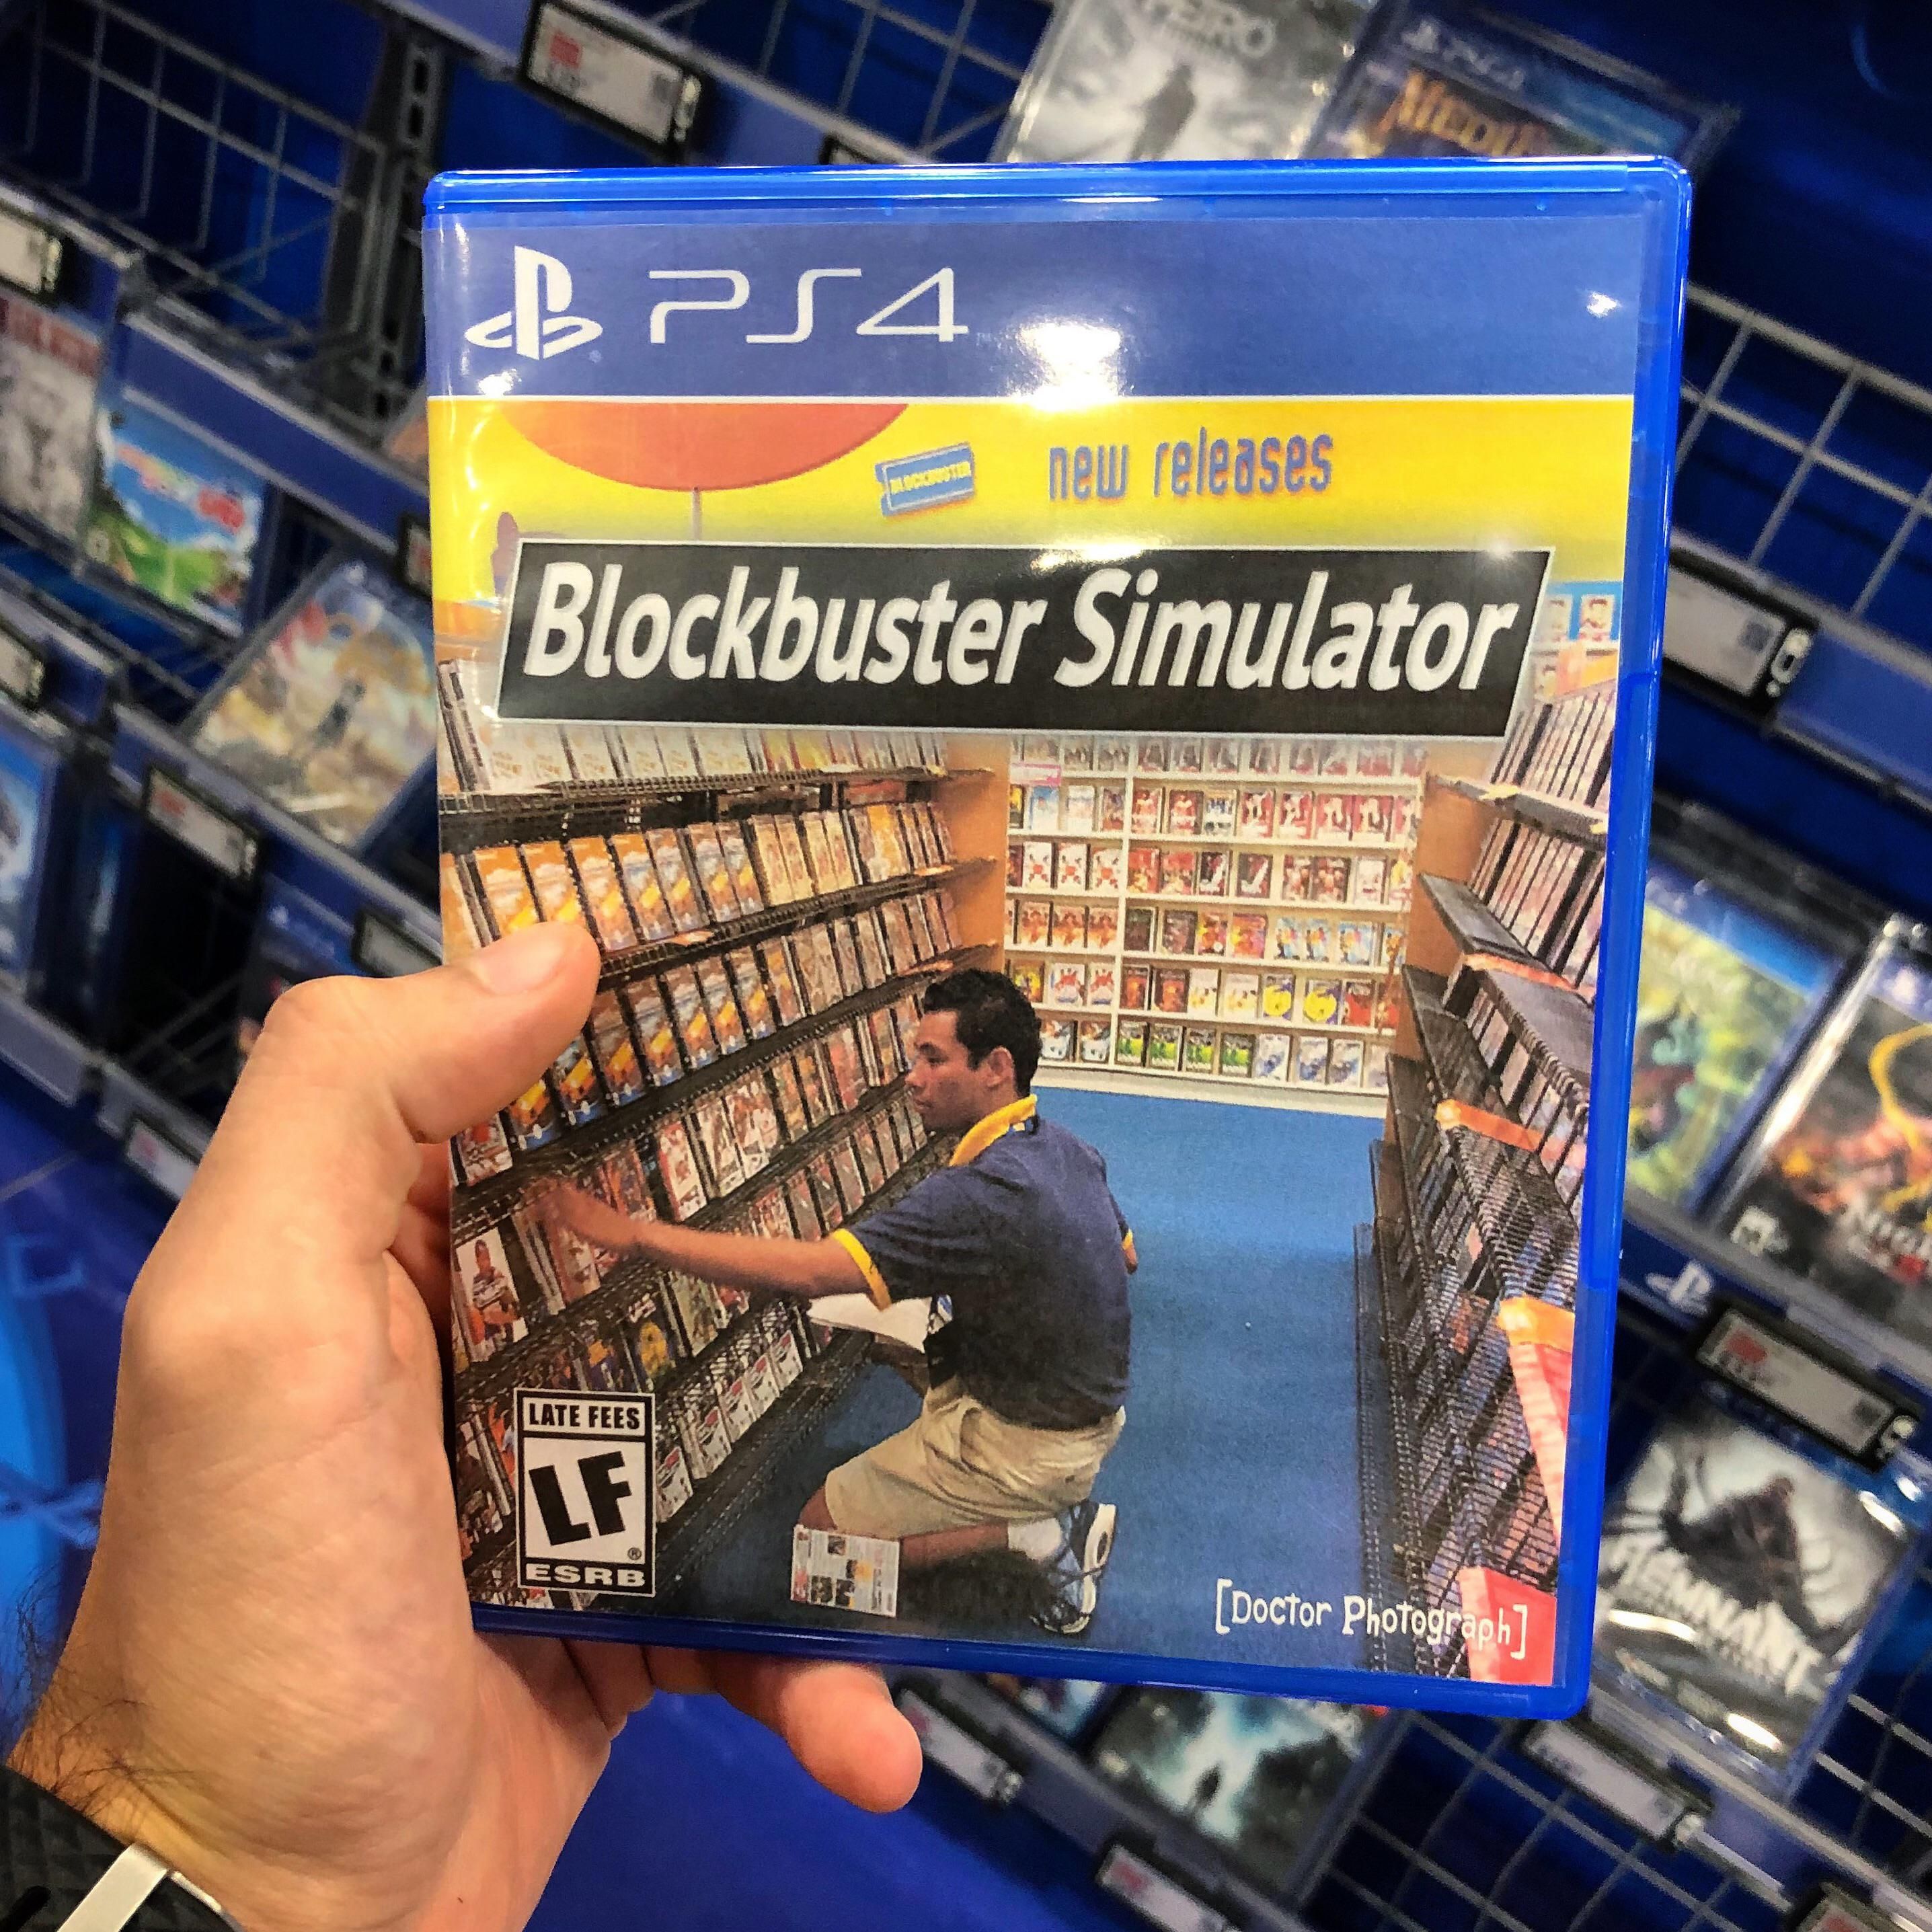 For those that miss “Blockbuster nights”